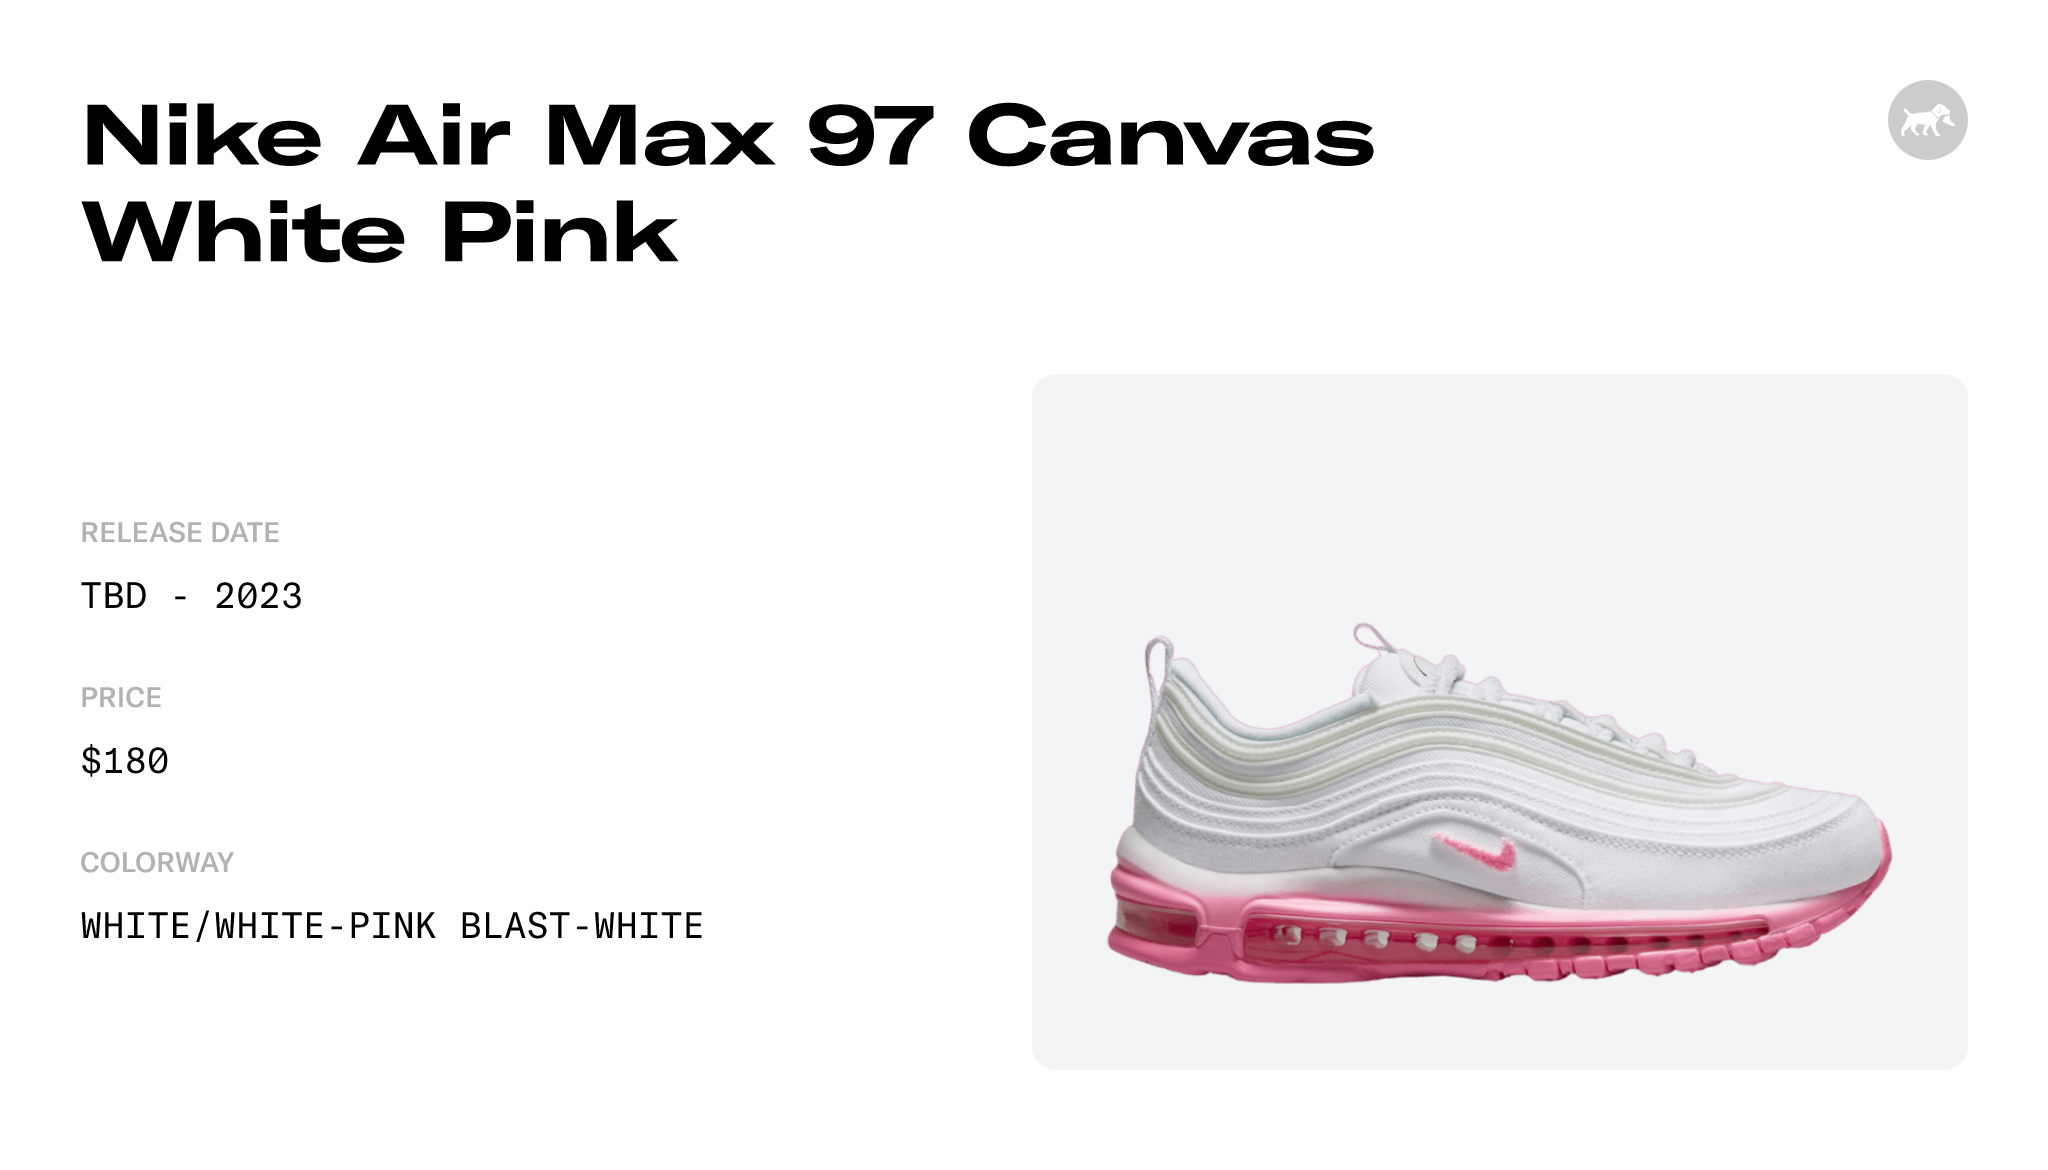 Nike Air Max 97 Canvas White Pink - FJ4549-100 Raffles and Release